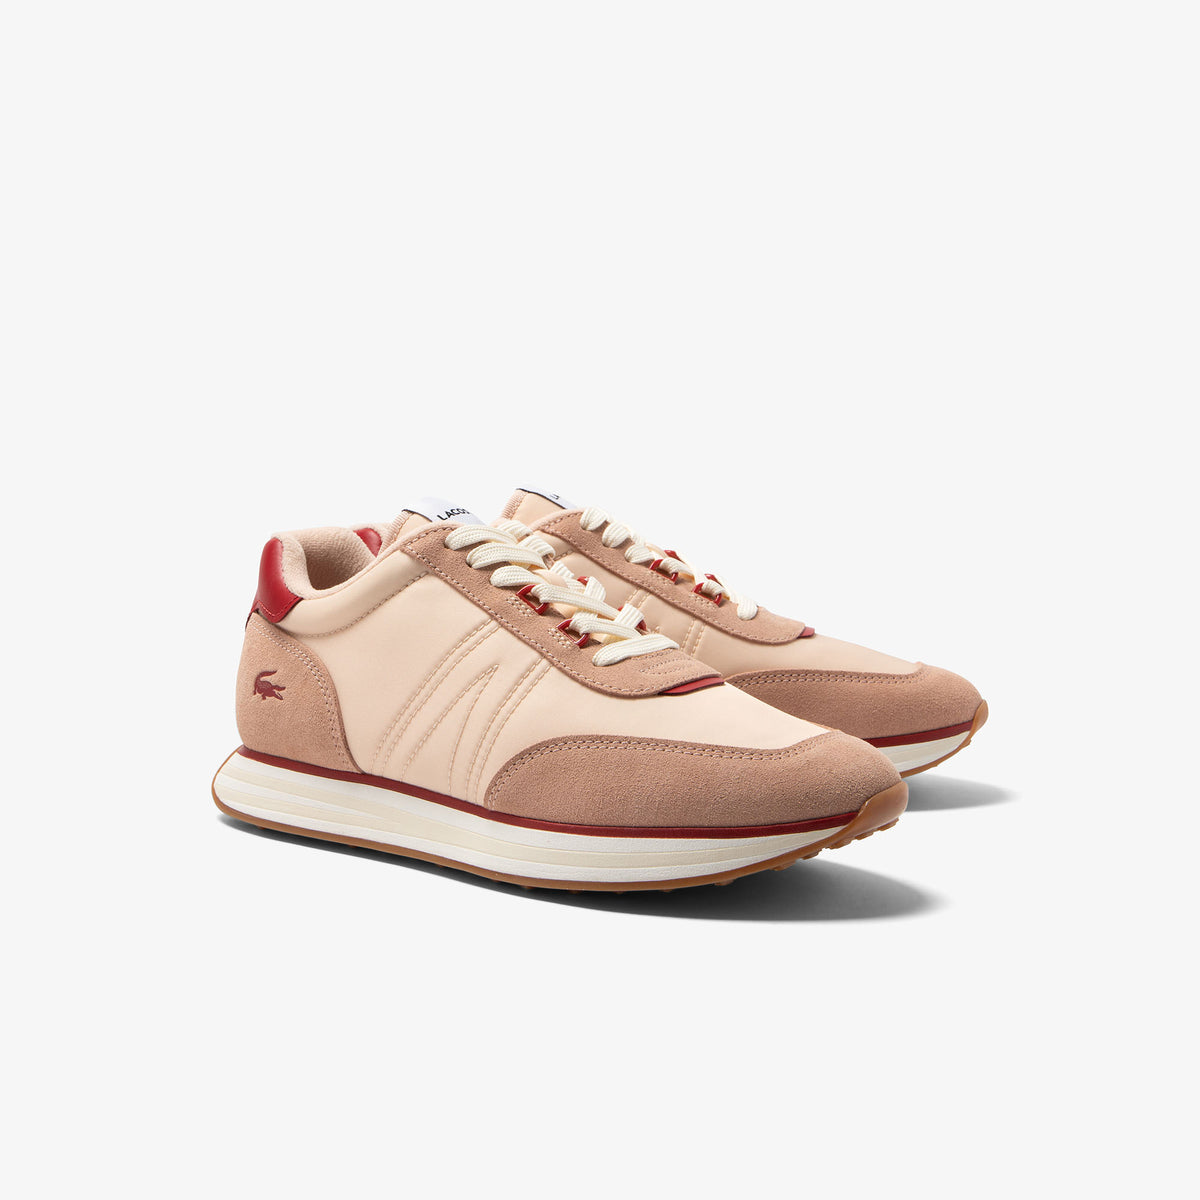 Lacoste - L-Spin Textile Trainers - Light Tan/Natural